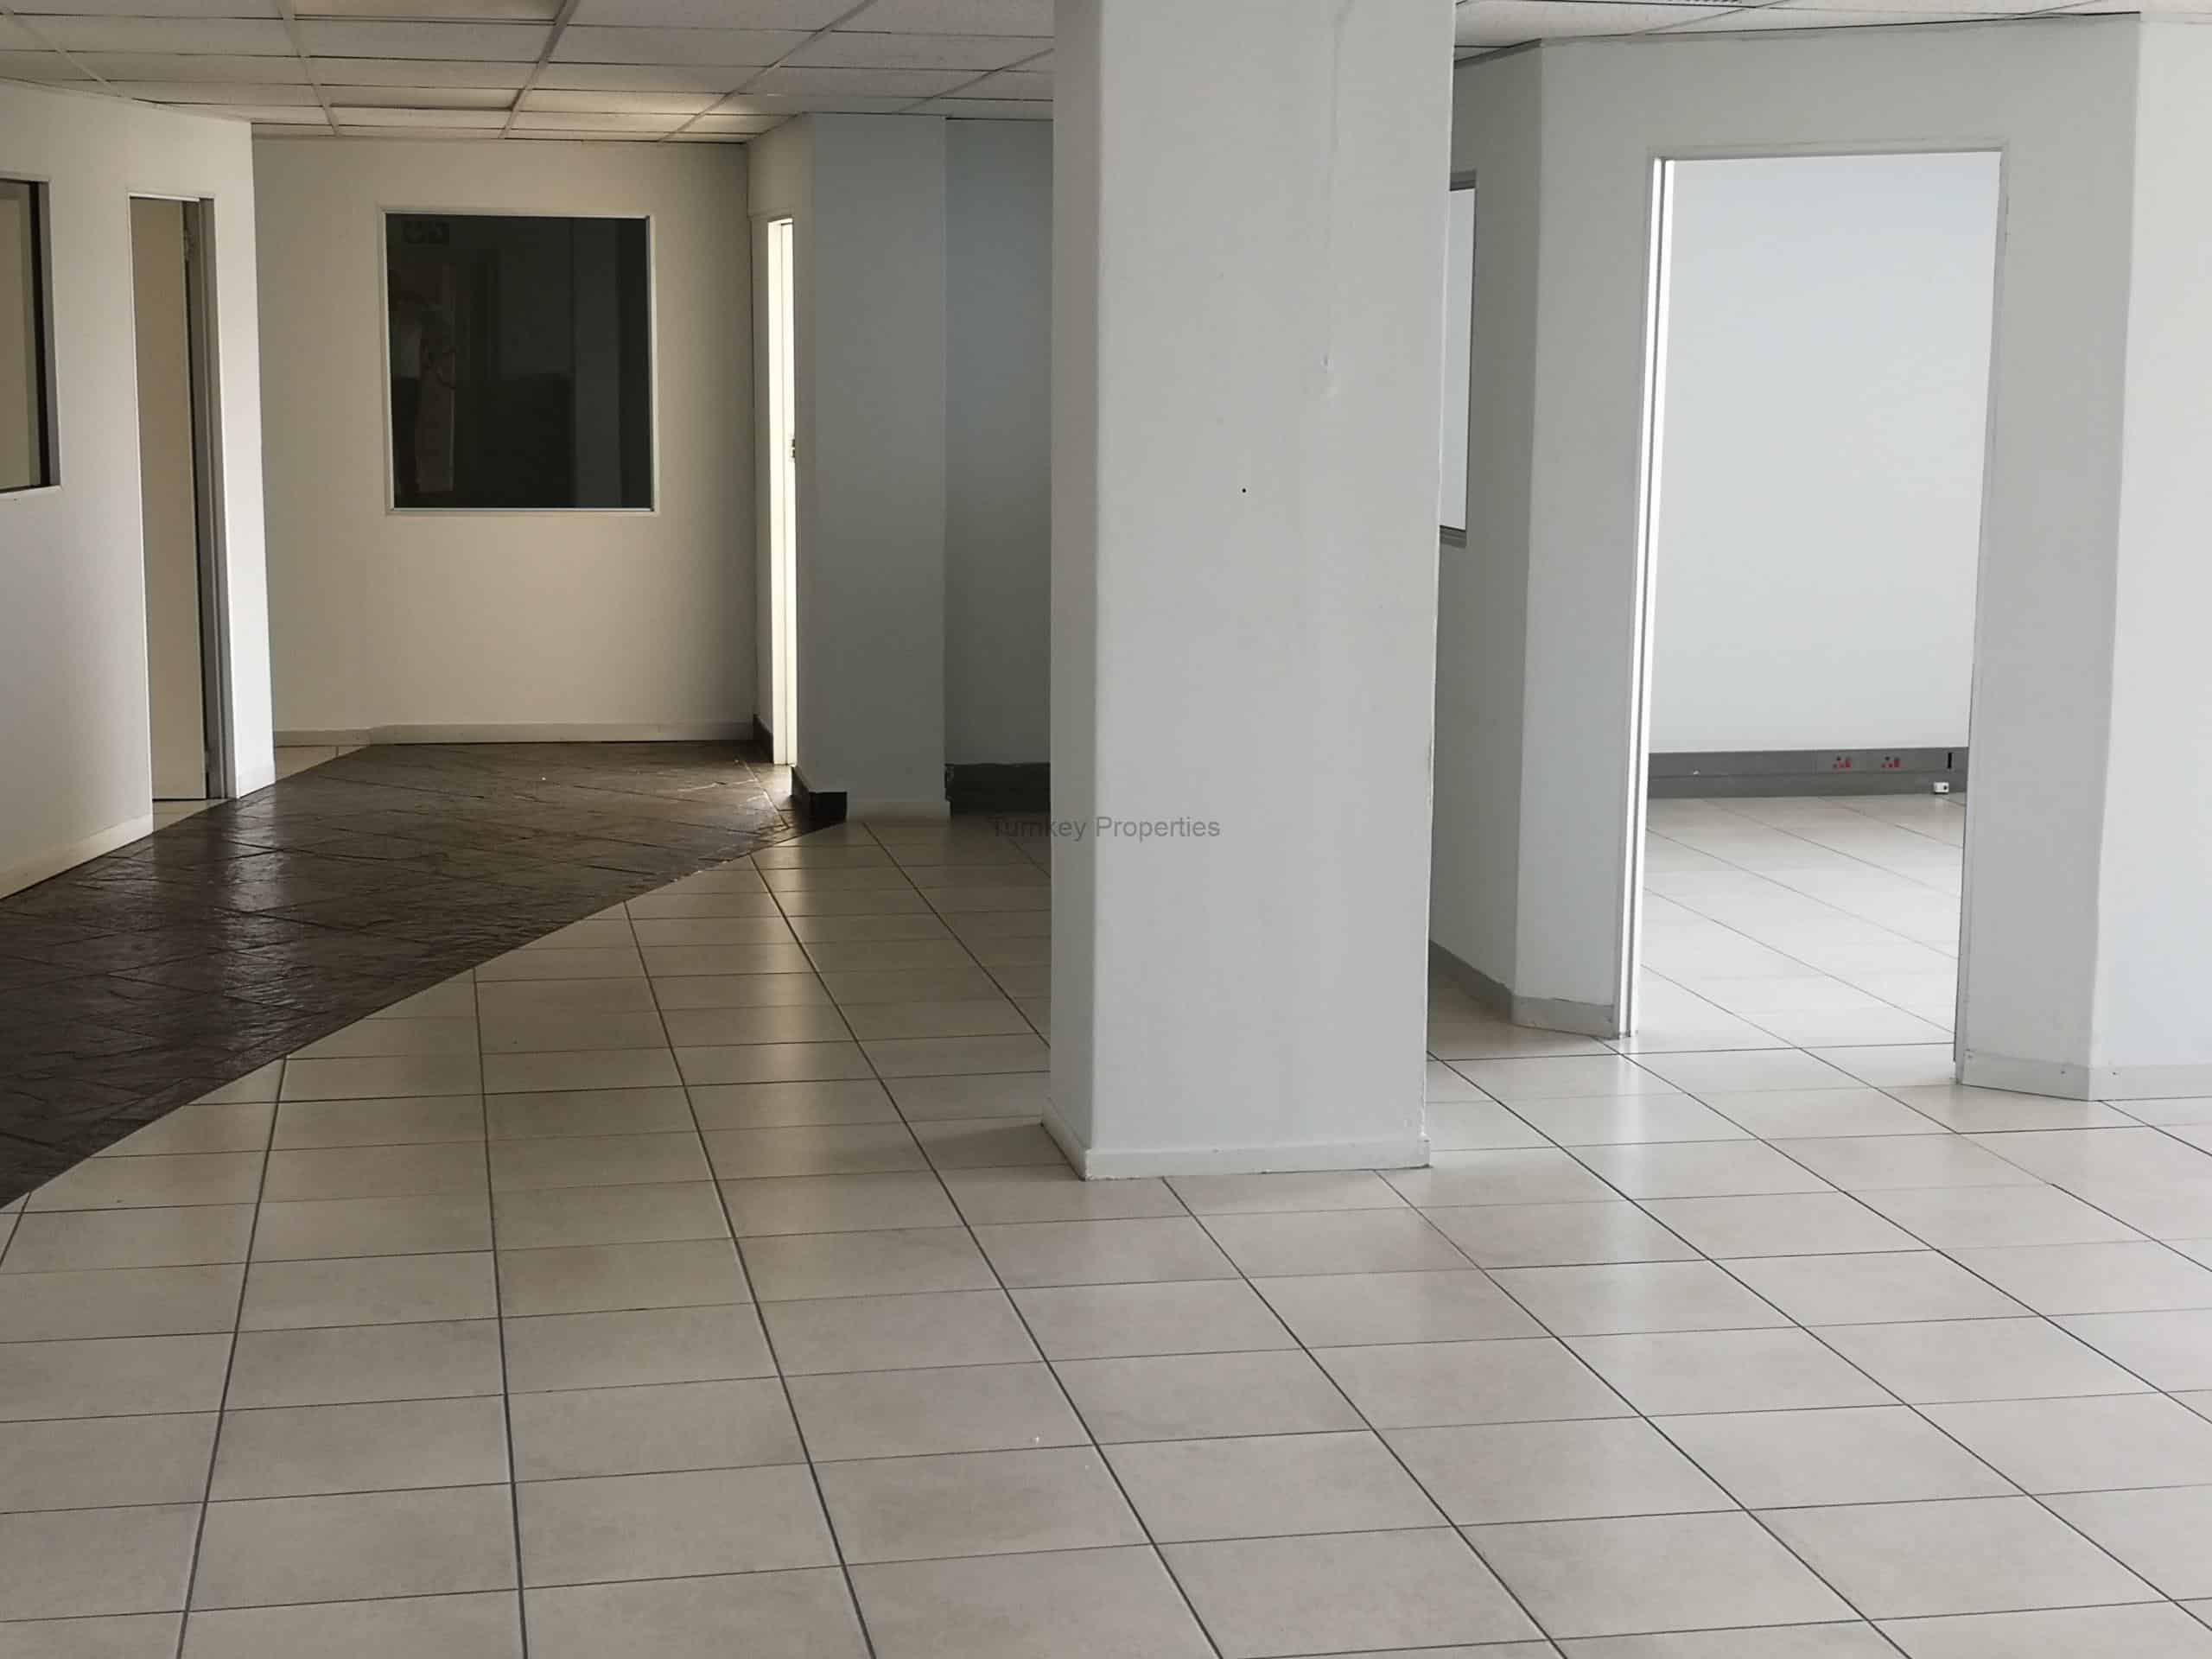 196m² office to let midrand Kyalami Business Park